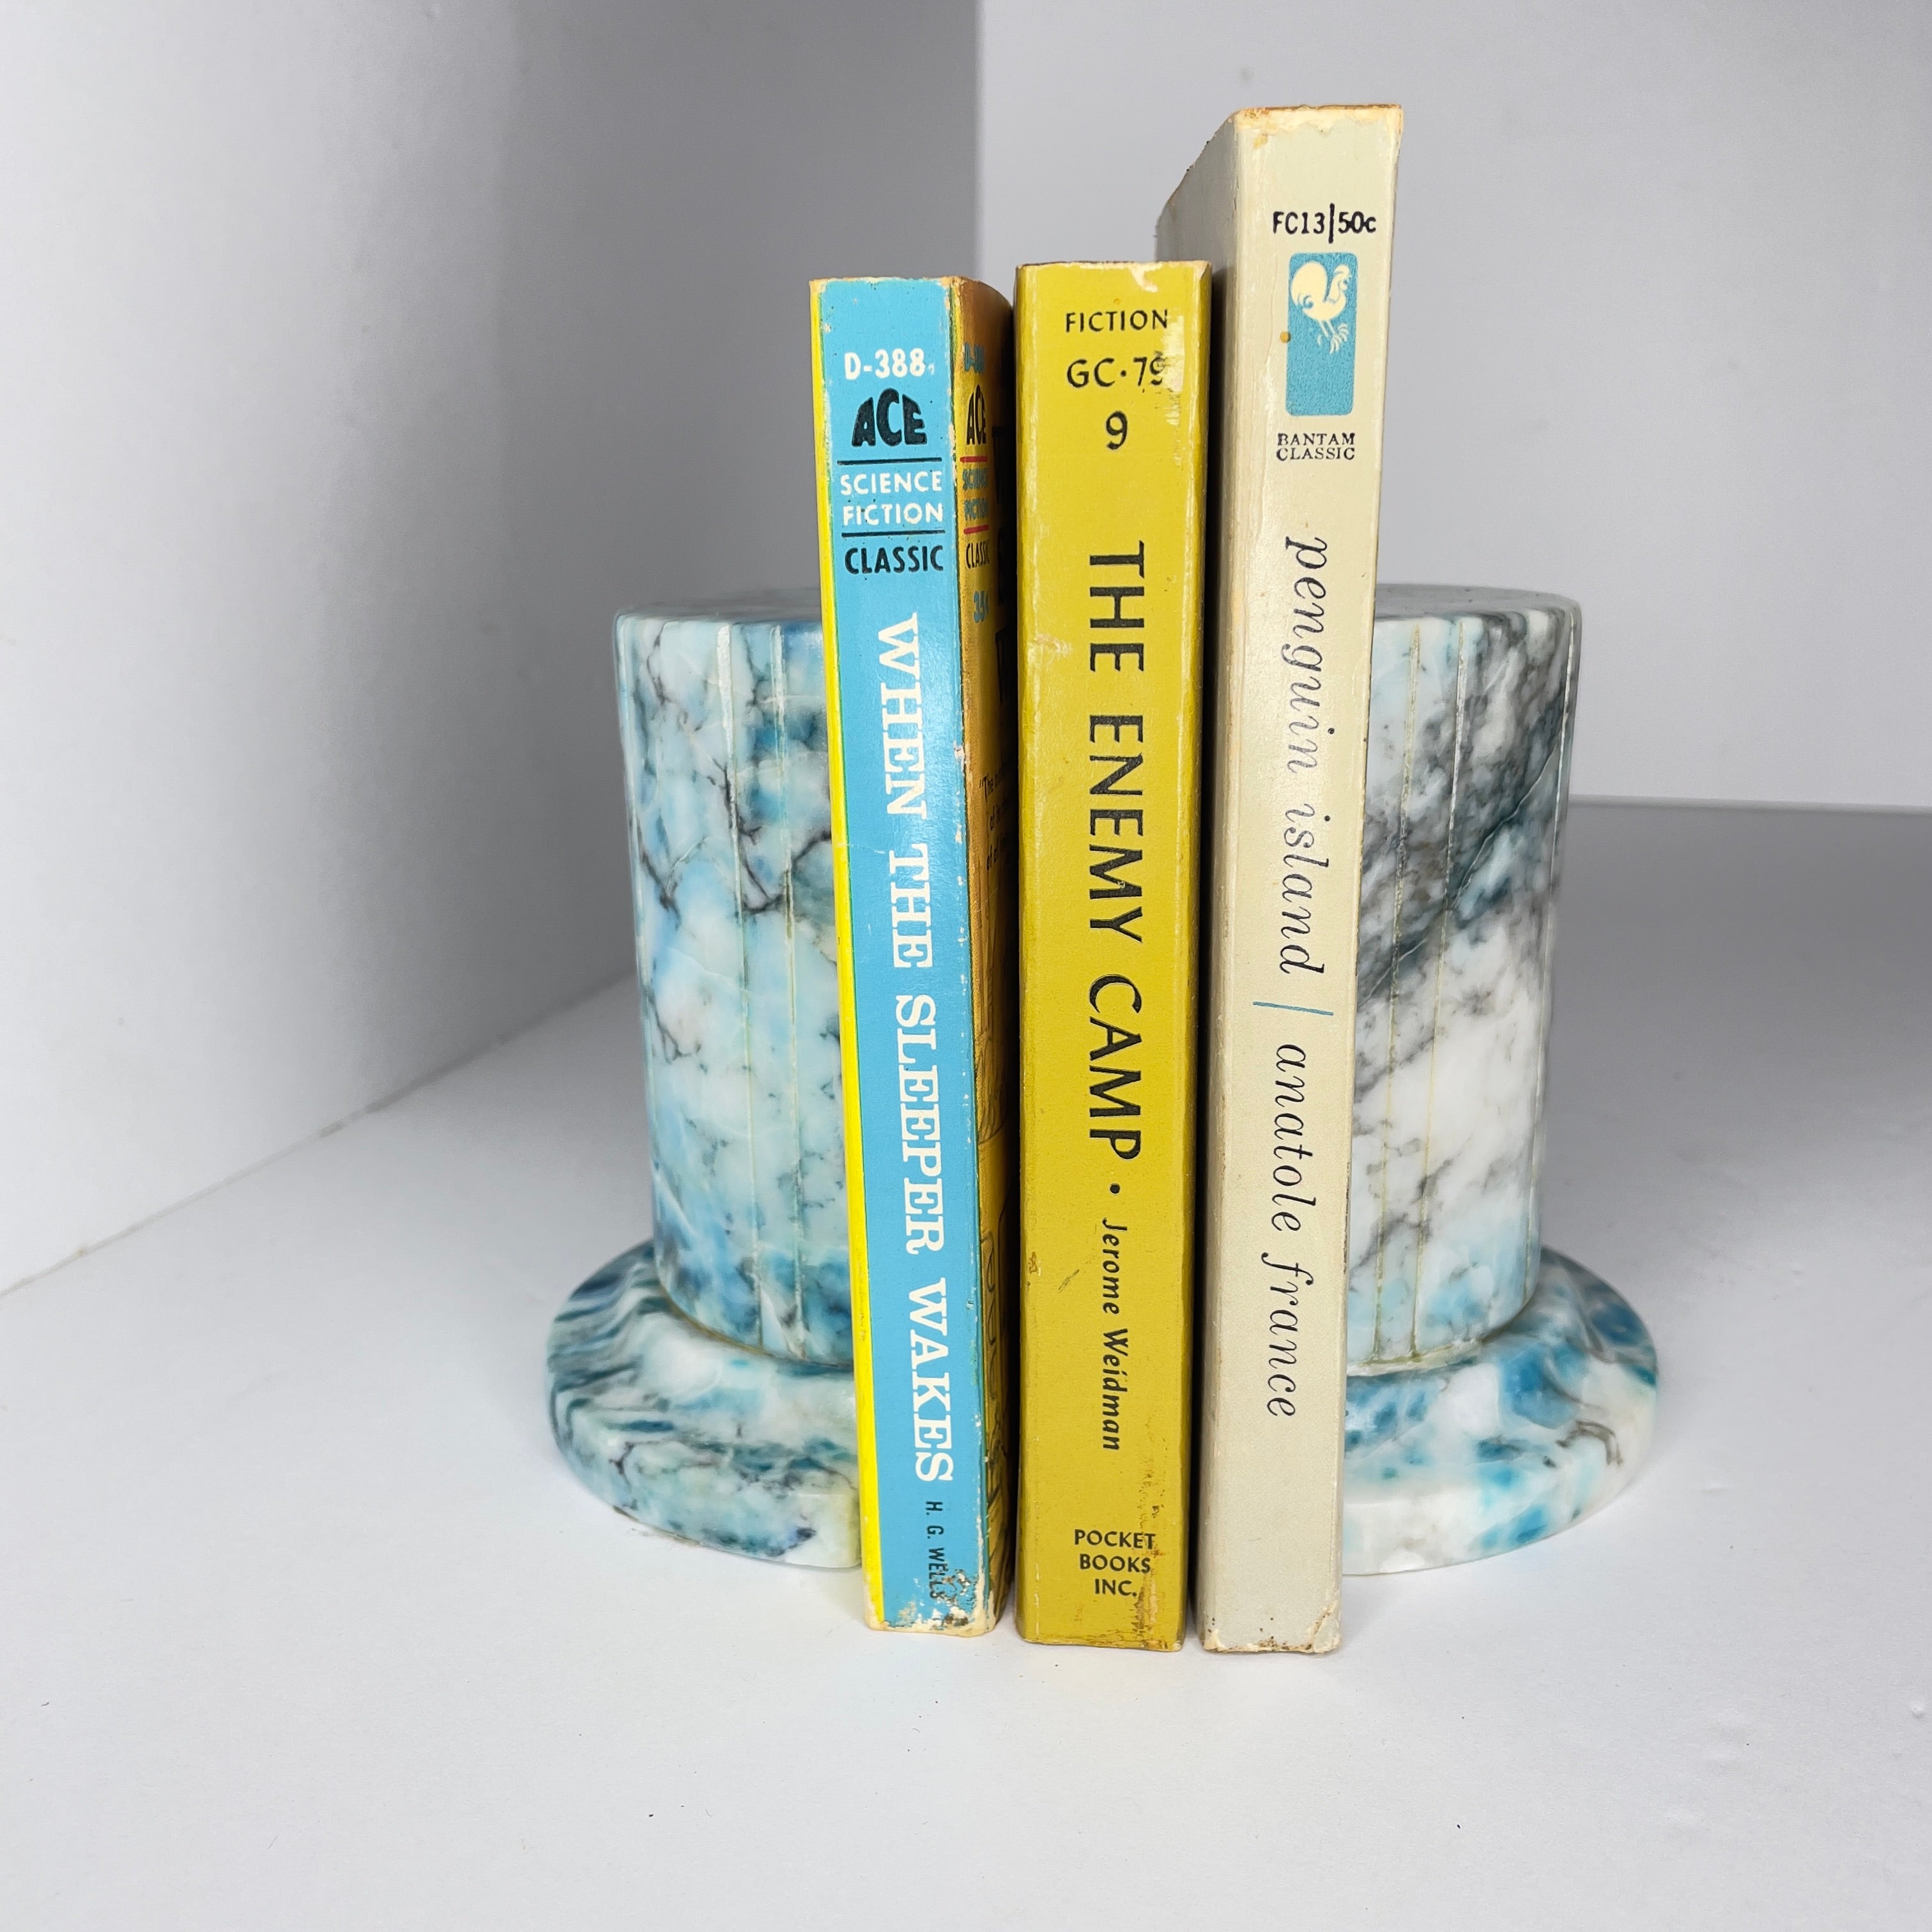 Pair of vintage blue alabaster marble bookends which have recently been refinished and polished to a high gloss finish. The original finish was yellowing and failing substantially. Now, these bookends are good for another 70 years. The original